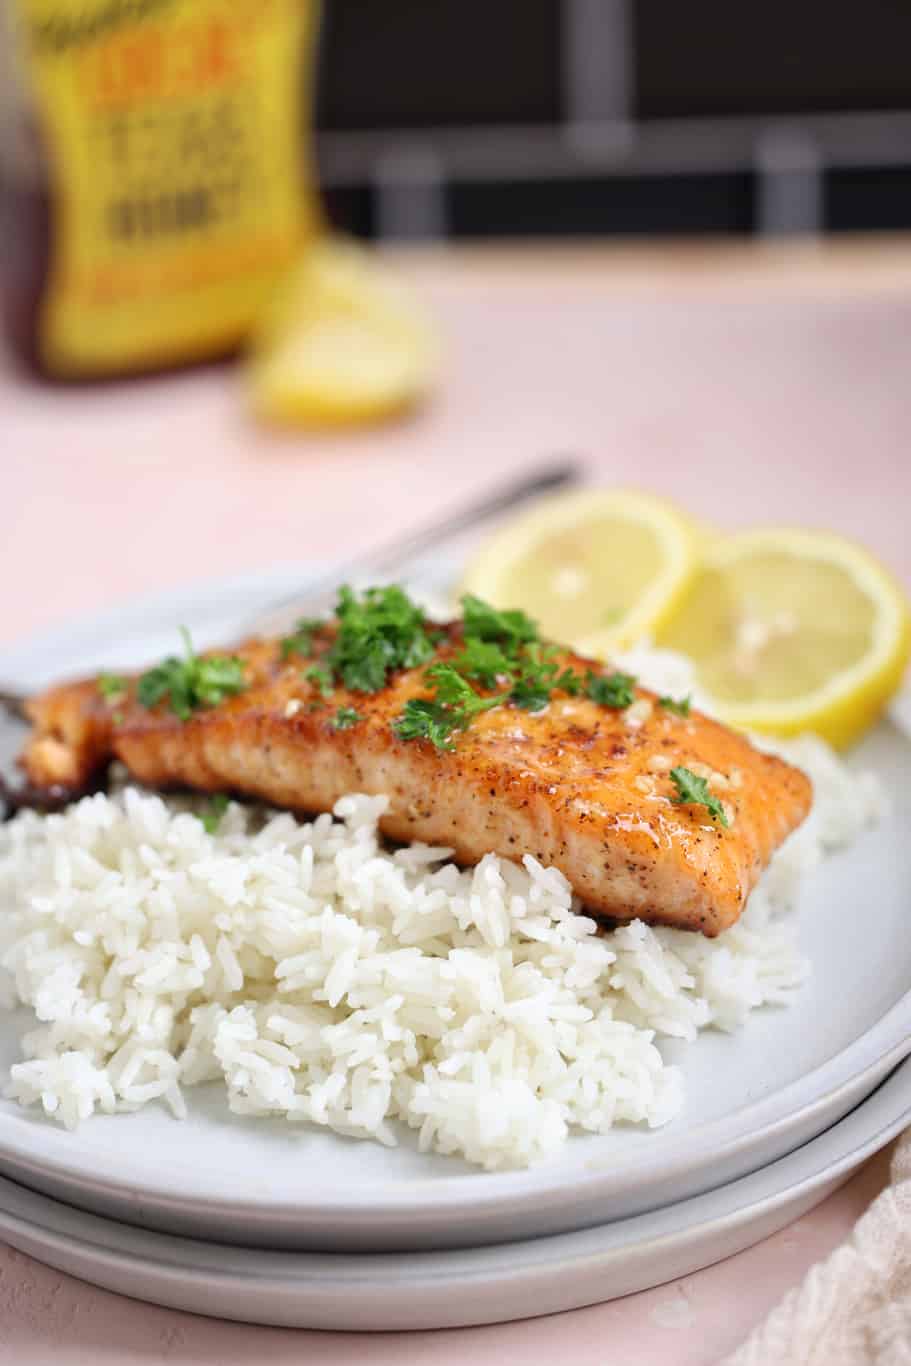 one filet of pan seared salmon garnished with parsley on a bed of white rice